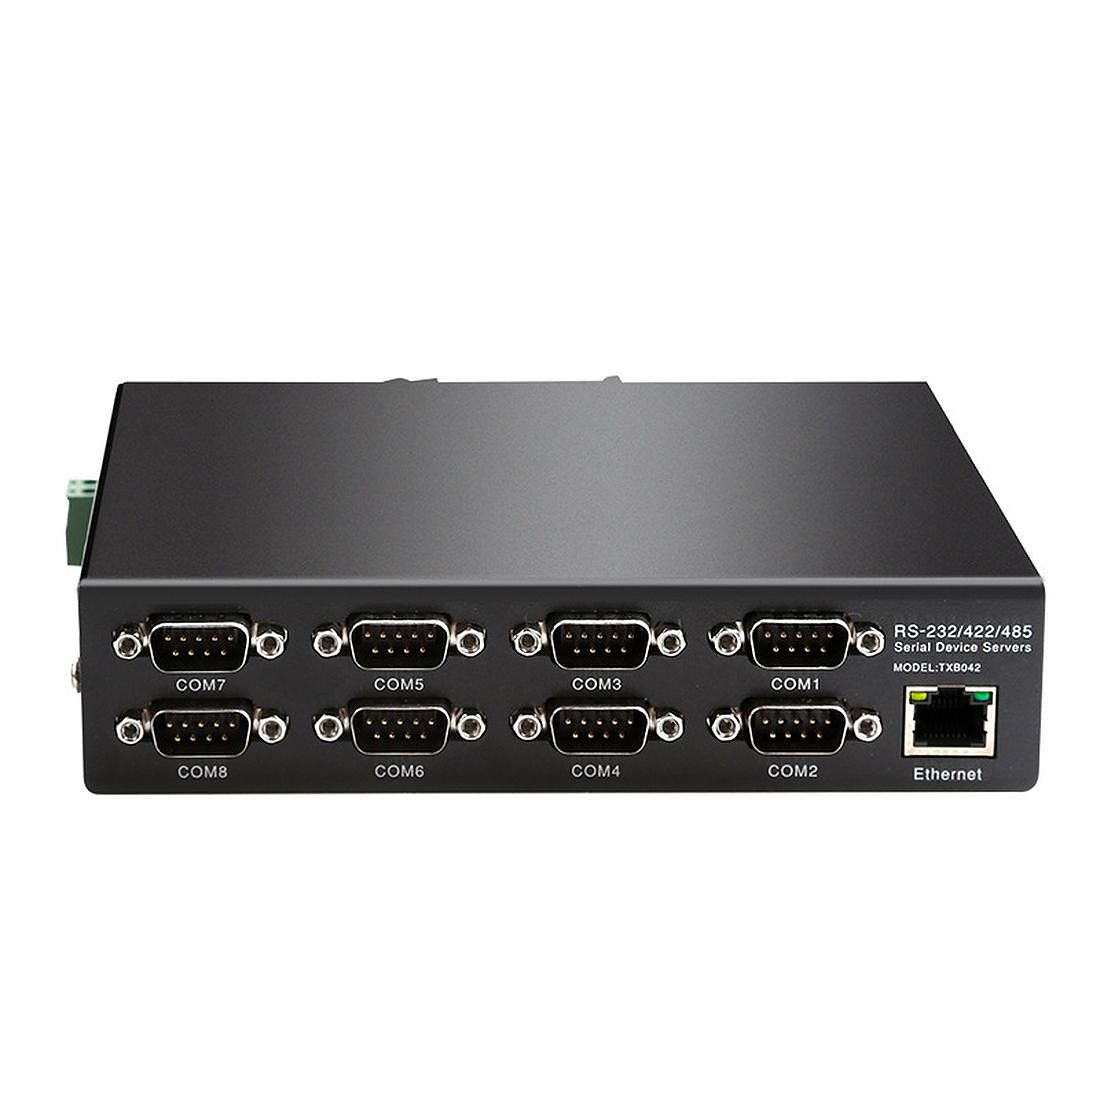 US$ 86.20 - DIEWU 8 ports RS232 RS485 RS422 to Ethernet TCP/IP